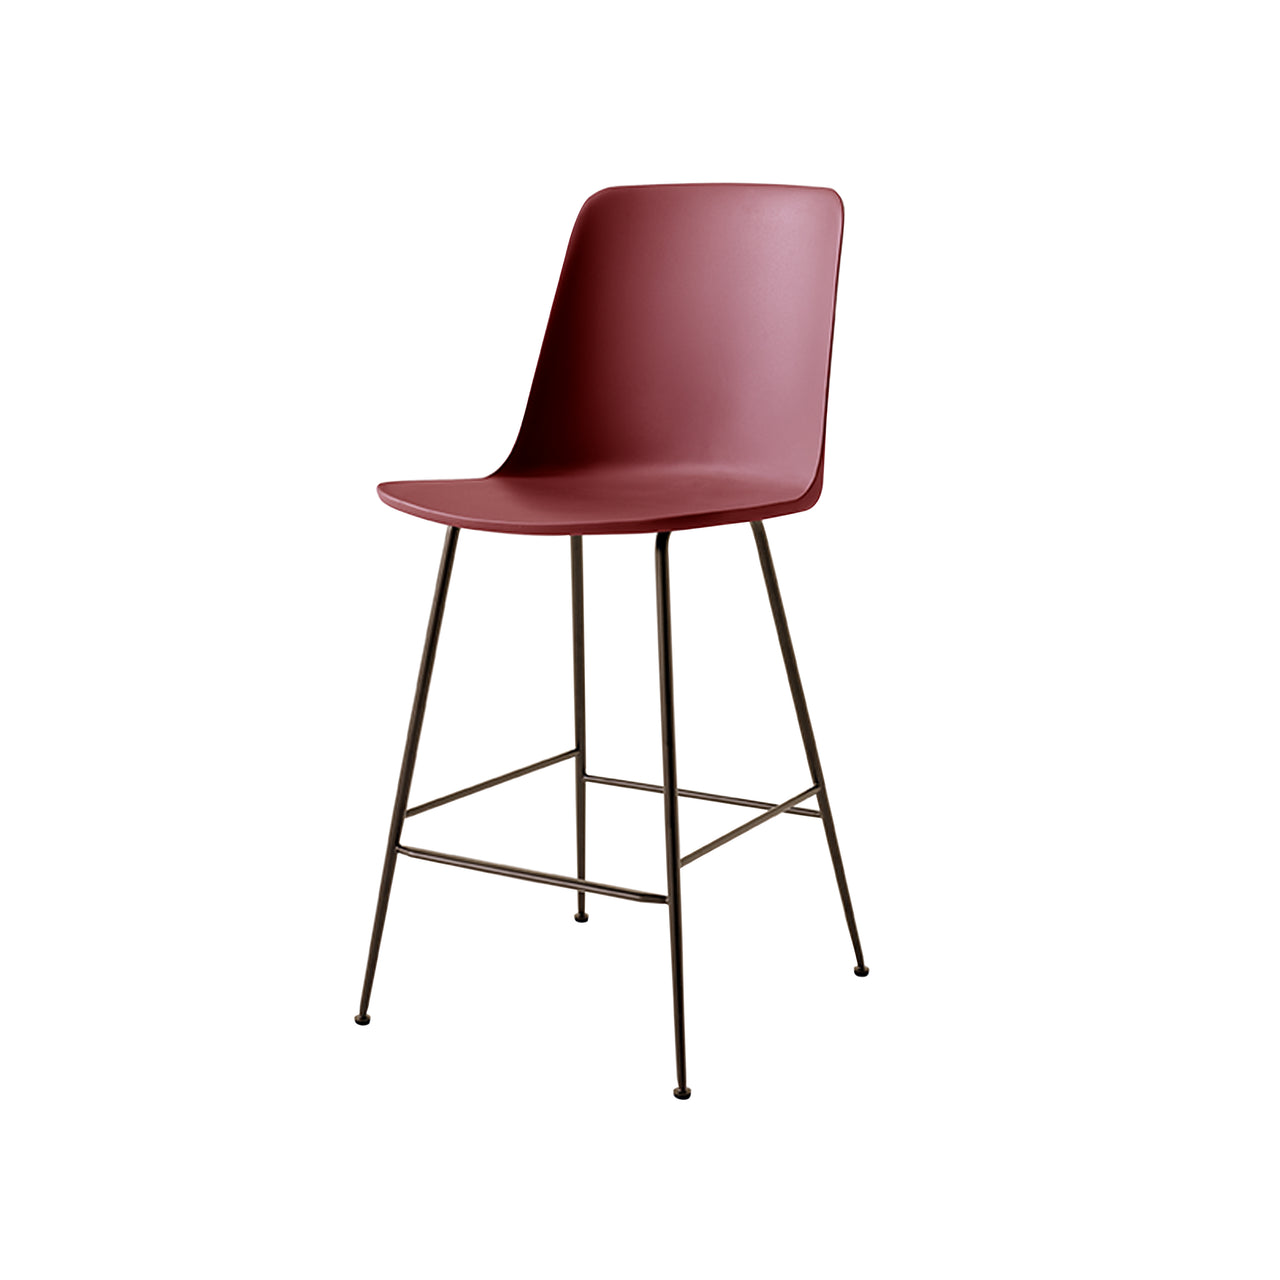 Rely Bar + Counter Highback Chair: HW91 + HW96 + Counter (HW91) + Red Brown + Bronzed